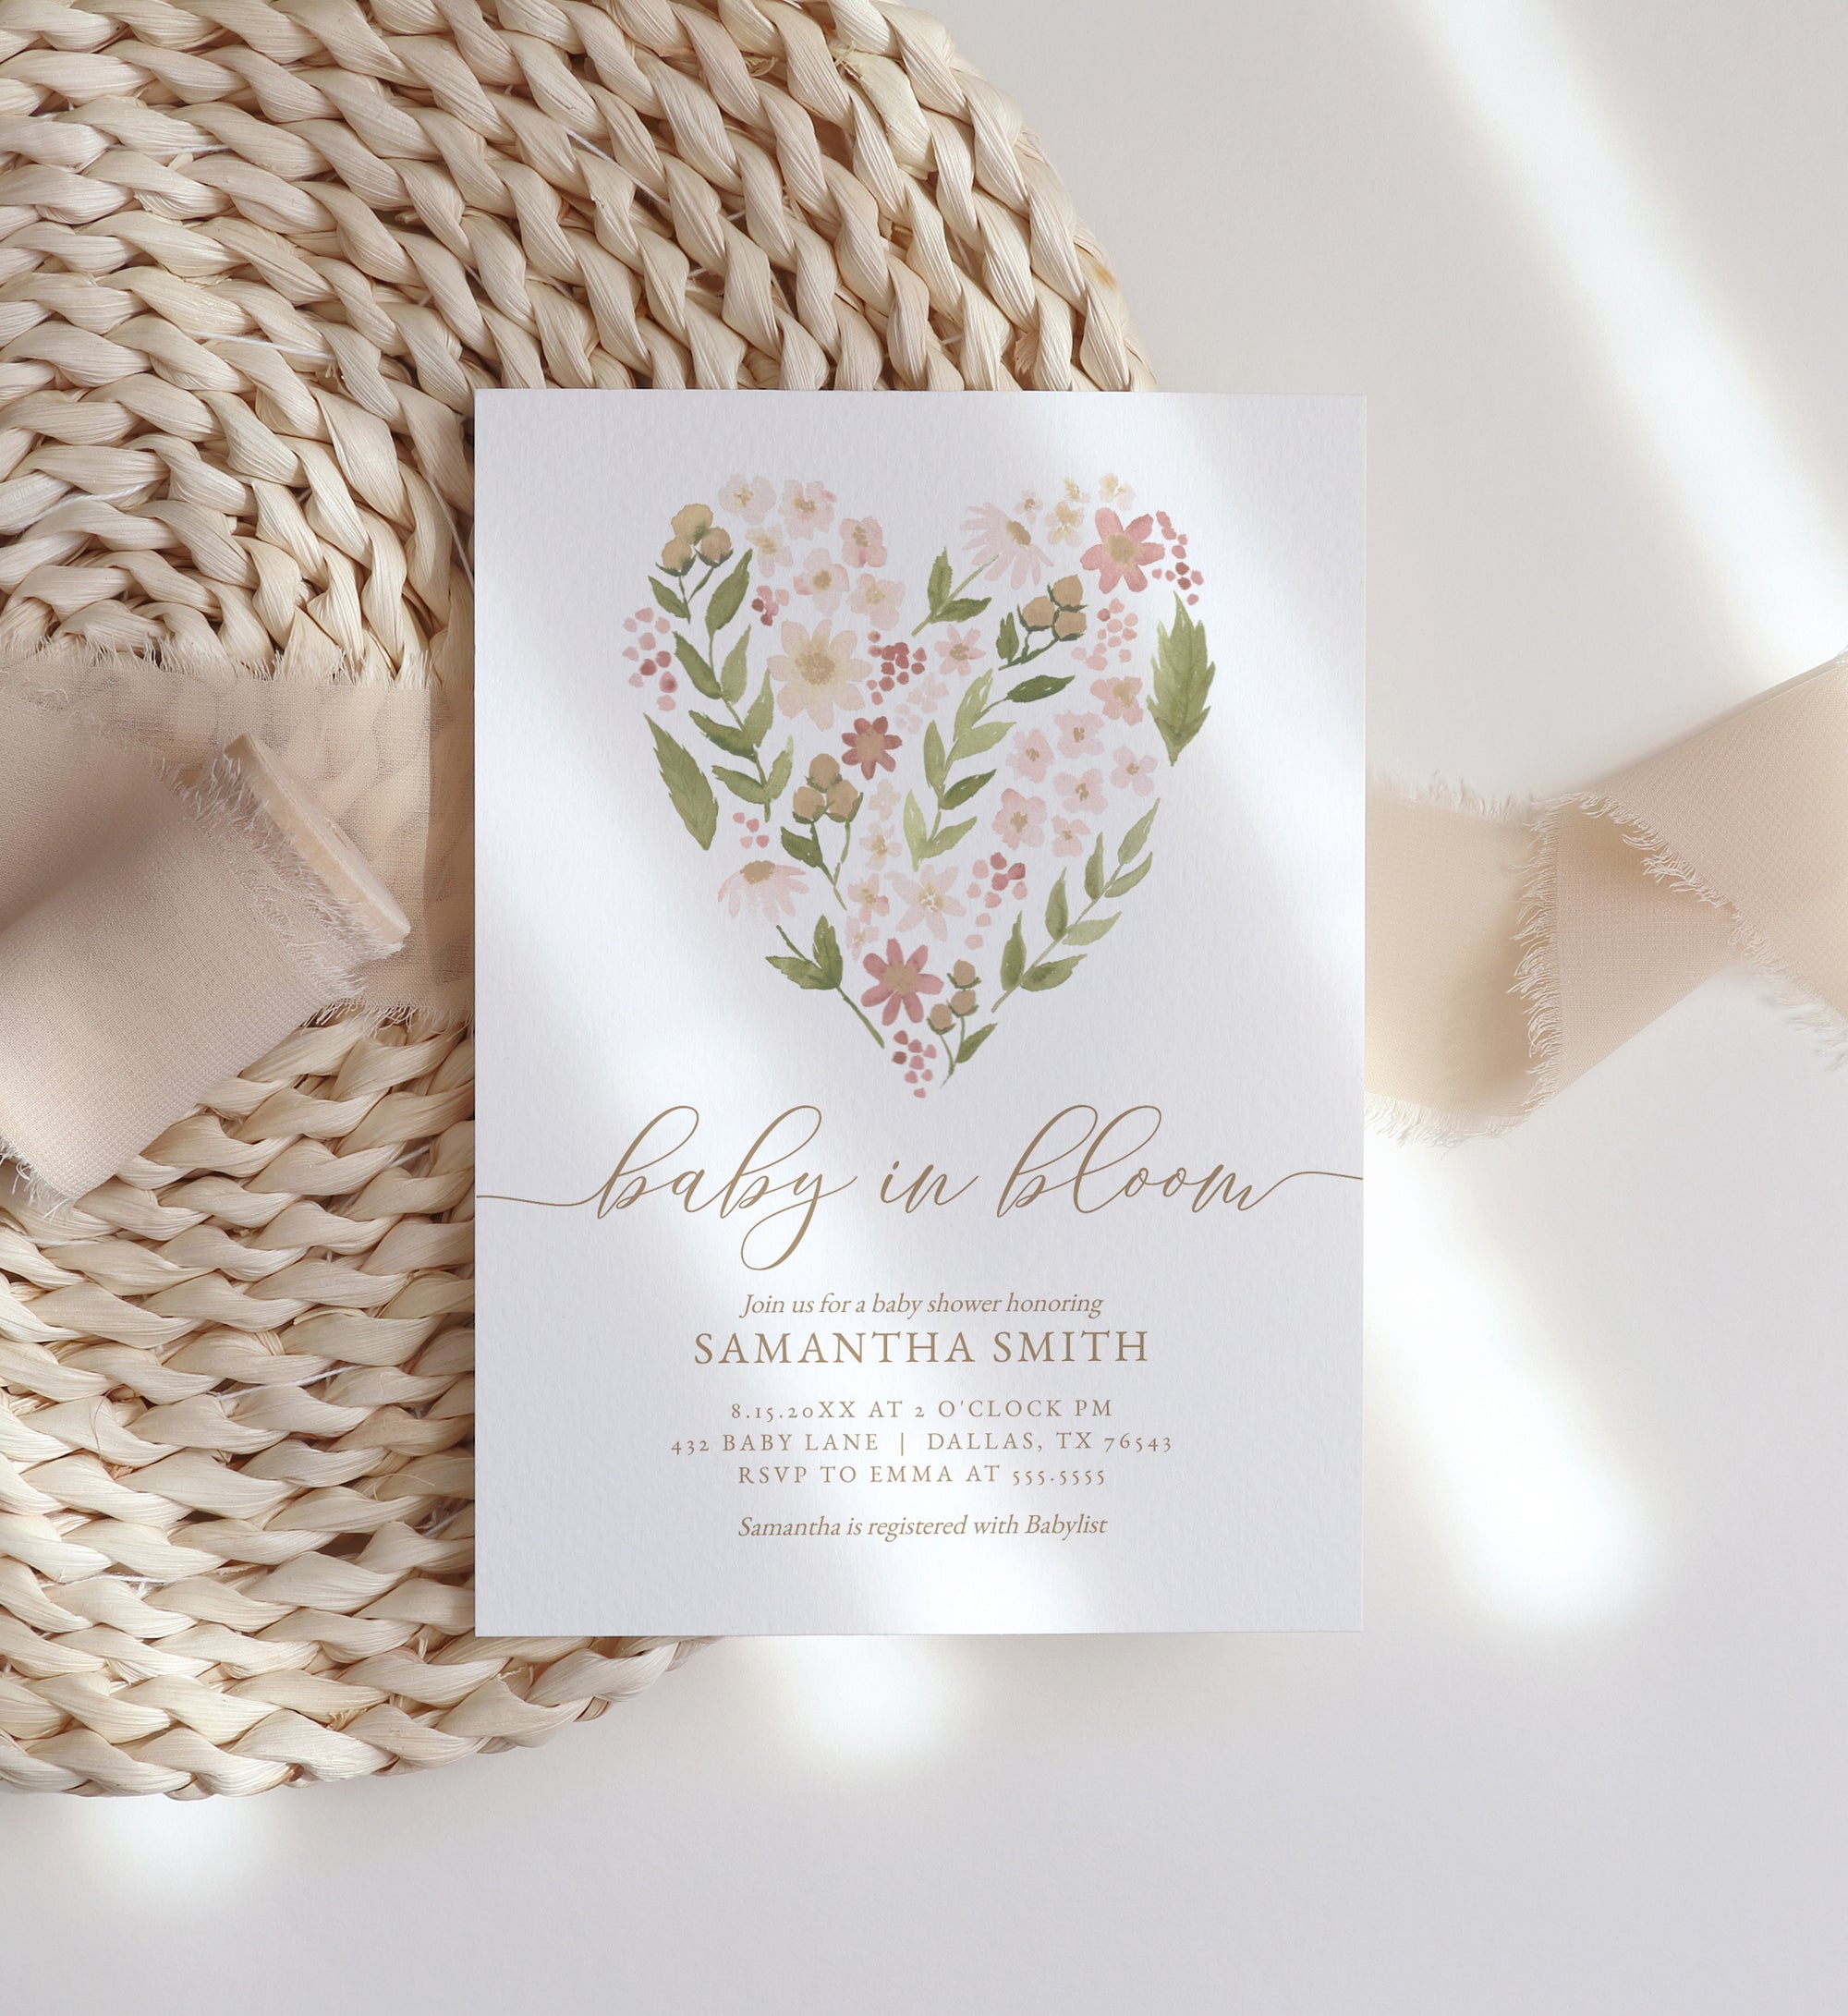 Editable Baby in Bloom Baby Shower Invitation Template